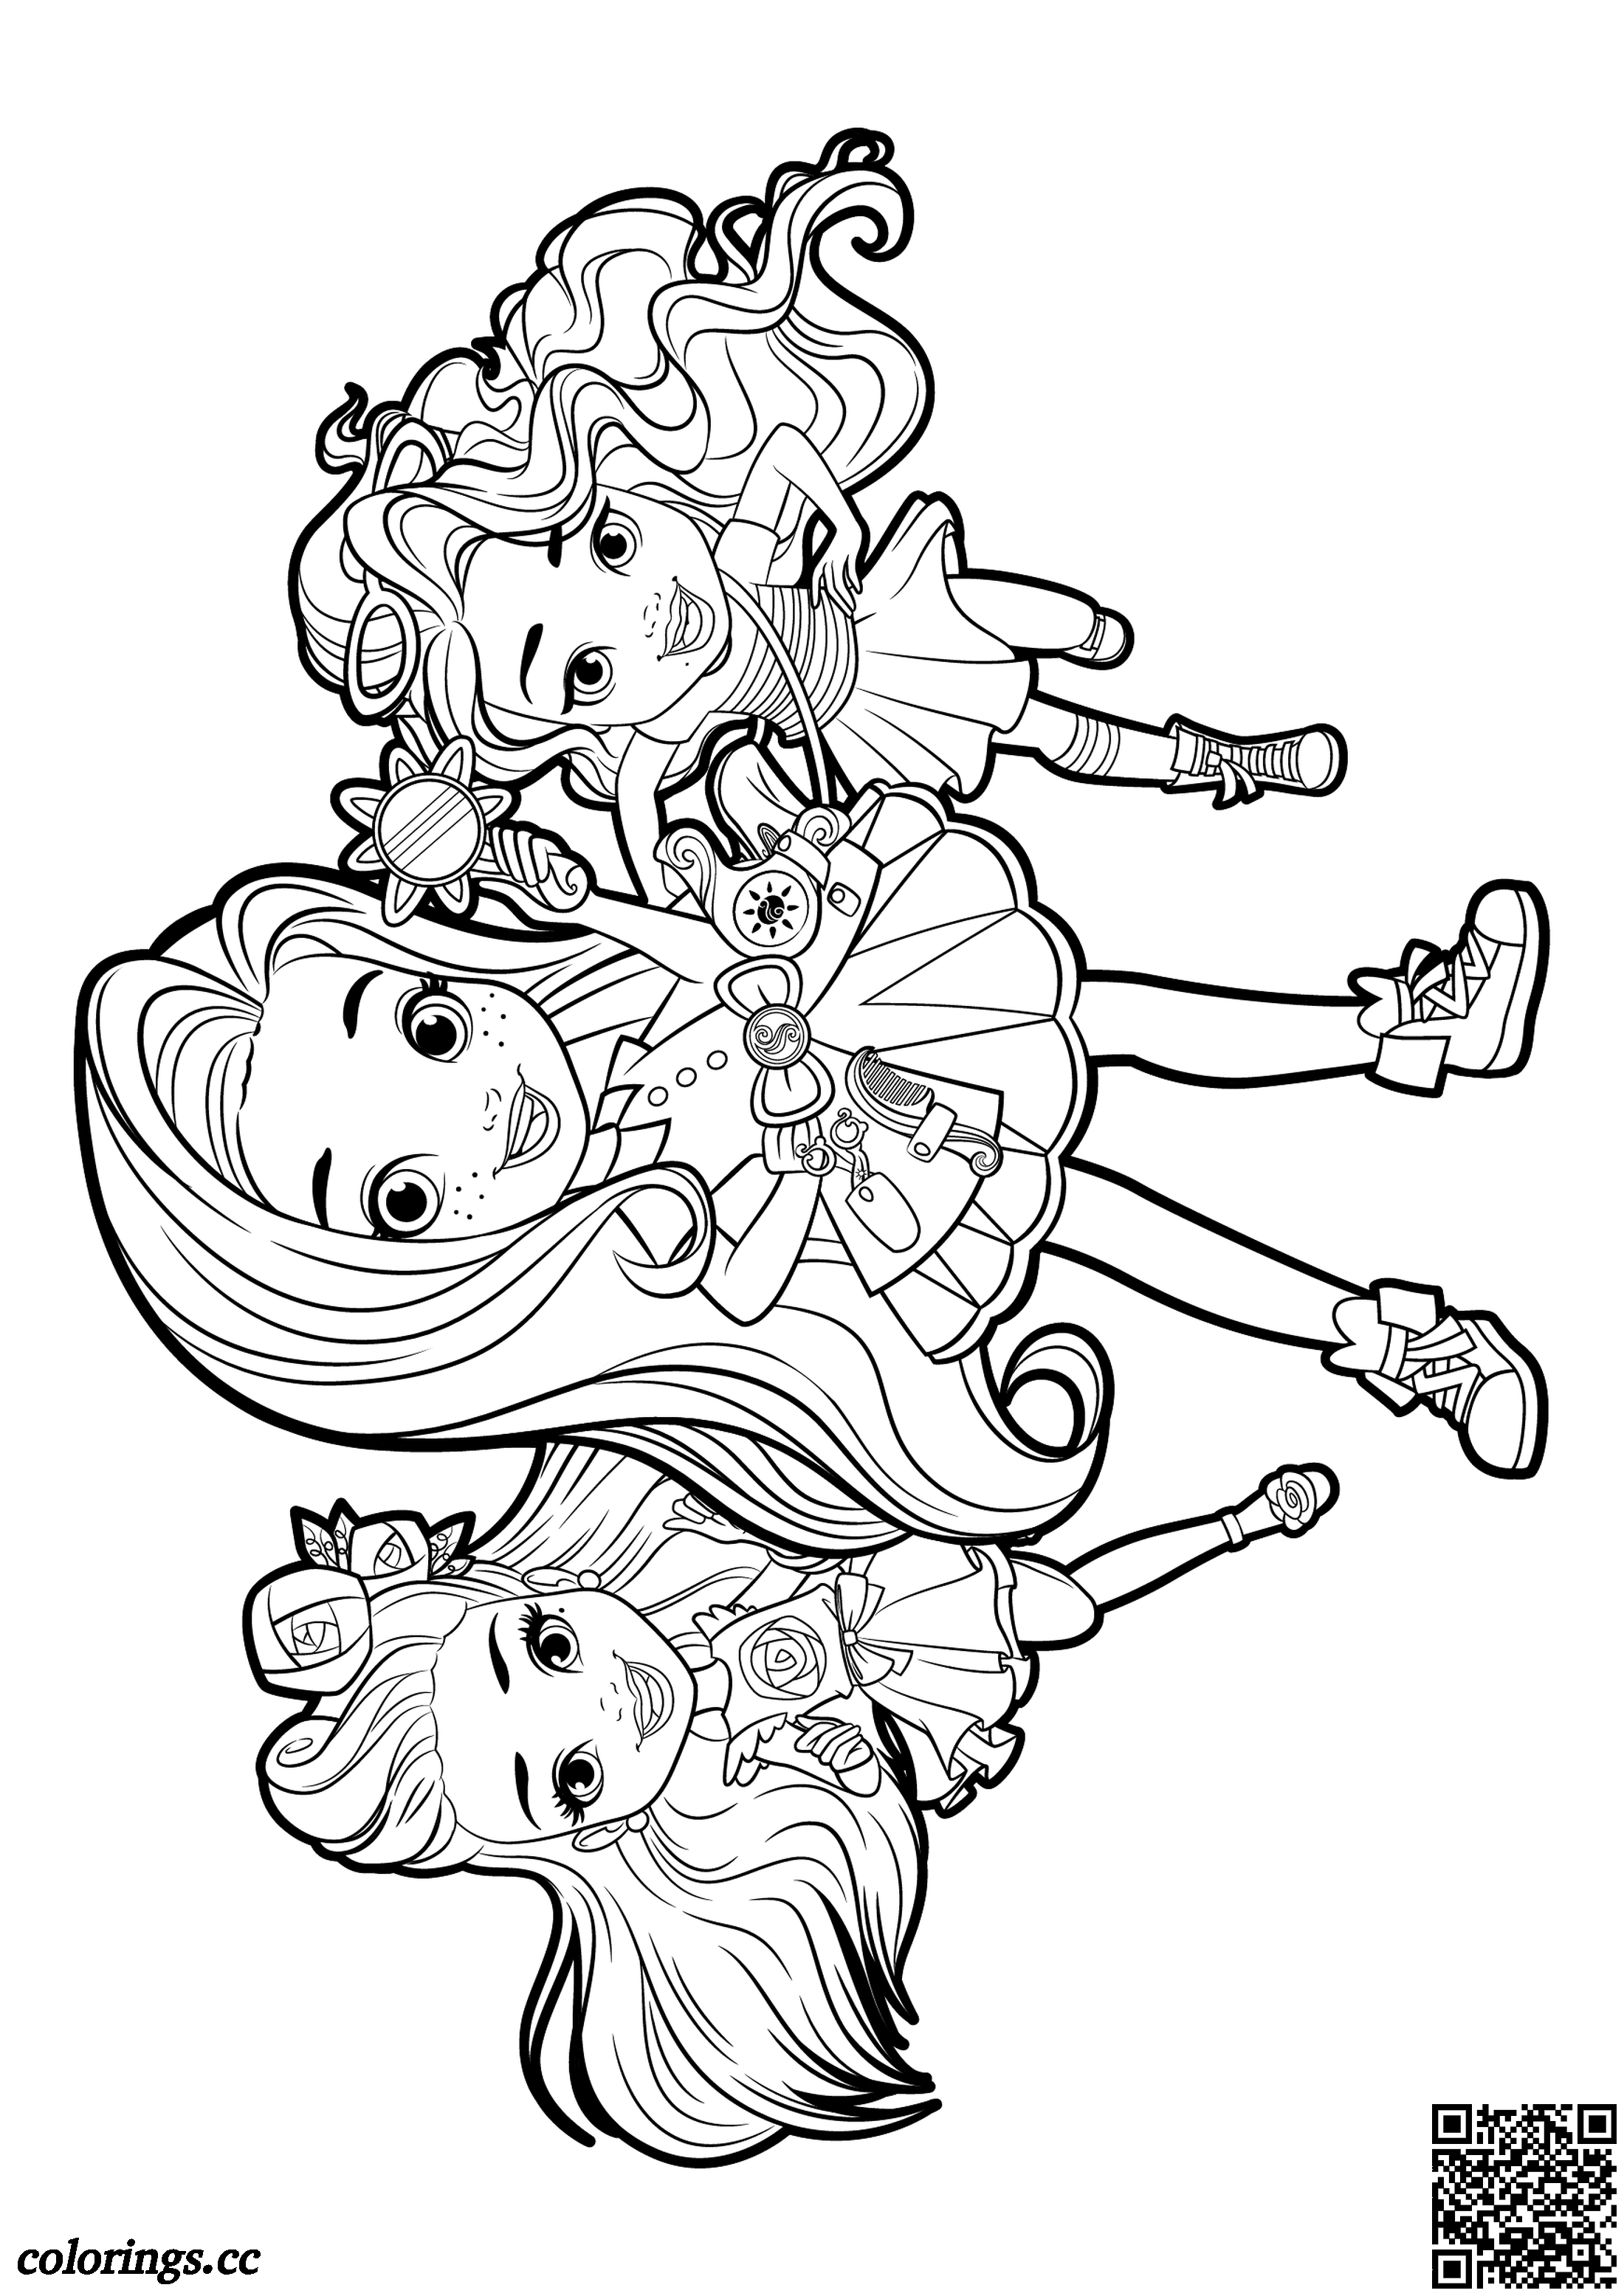 Blair, Sunny and Rox coloring pages, Sunny Day coloring pages ...